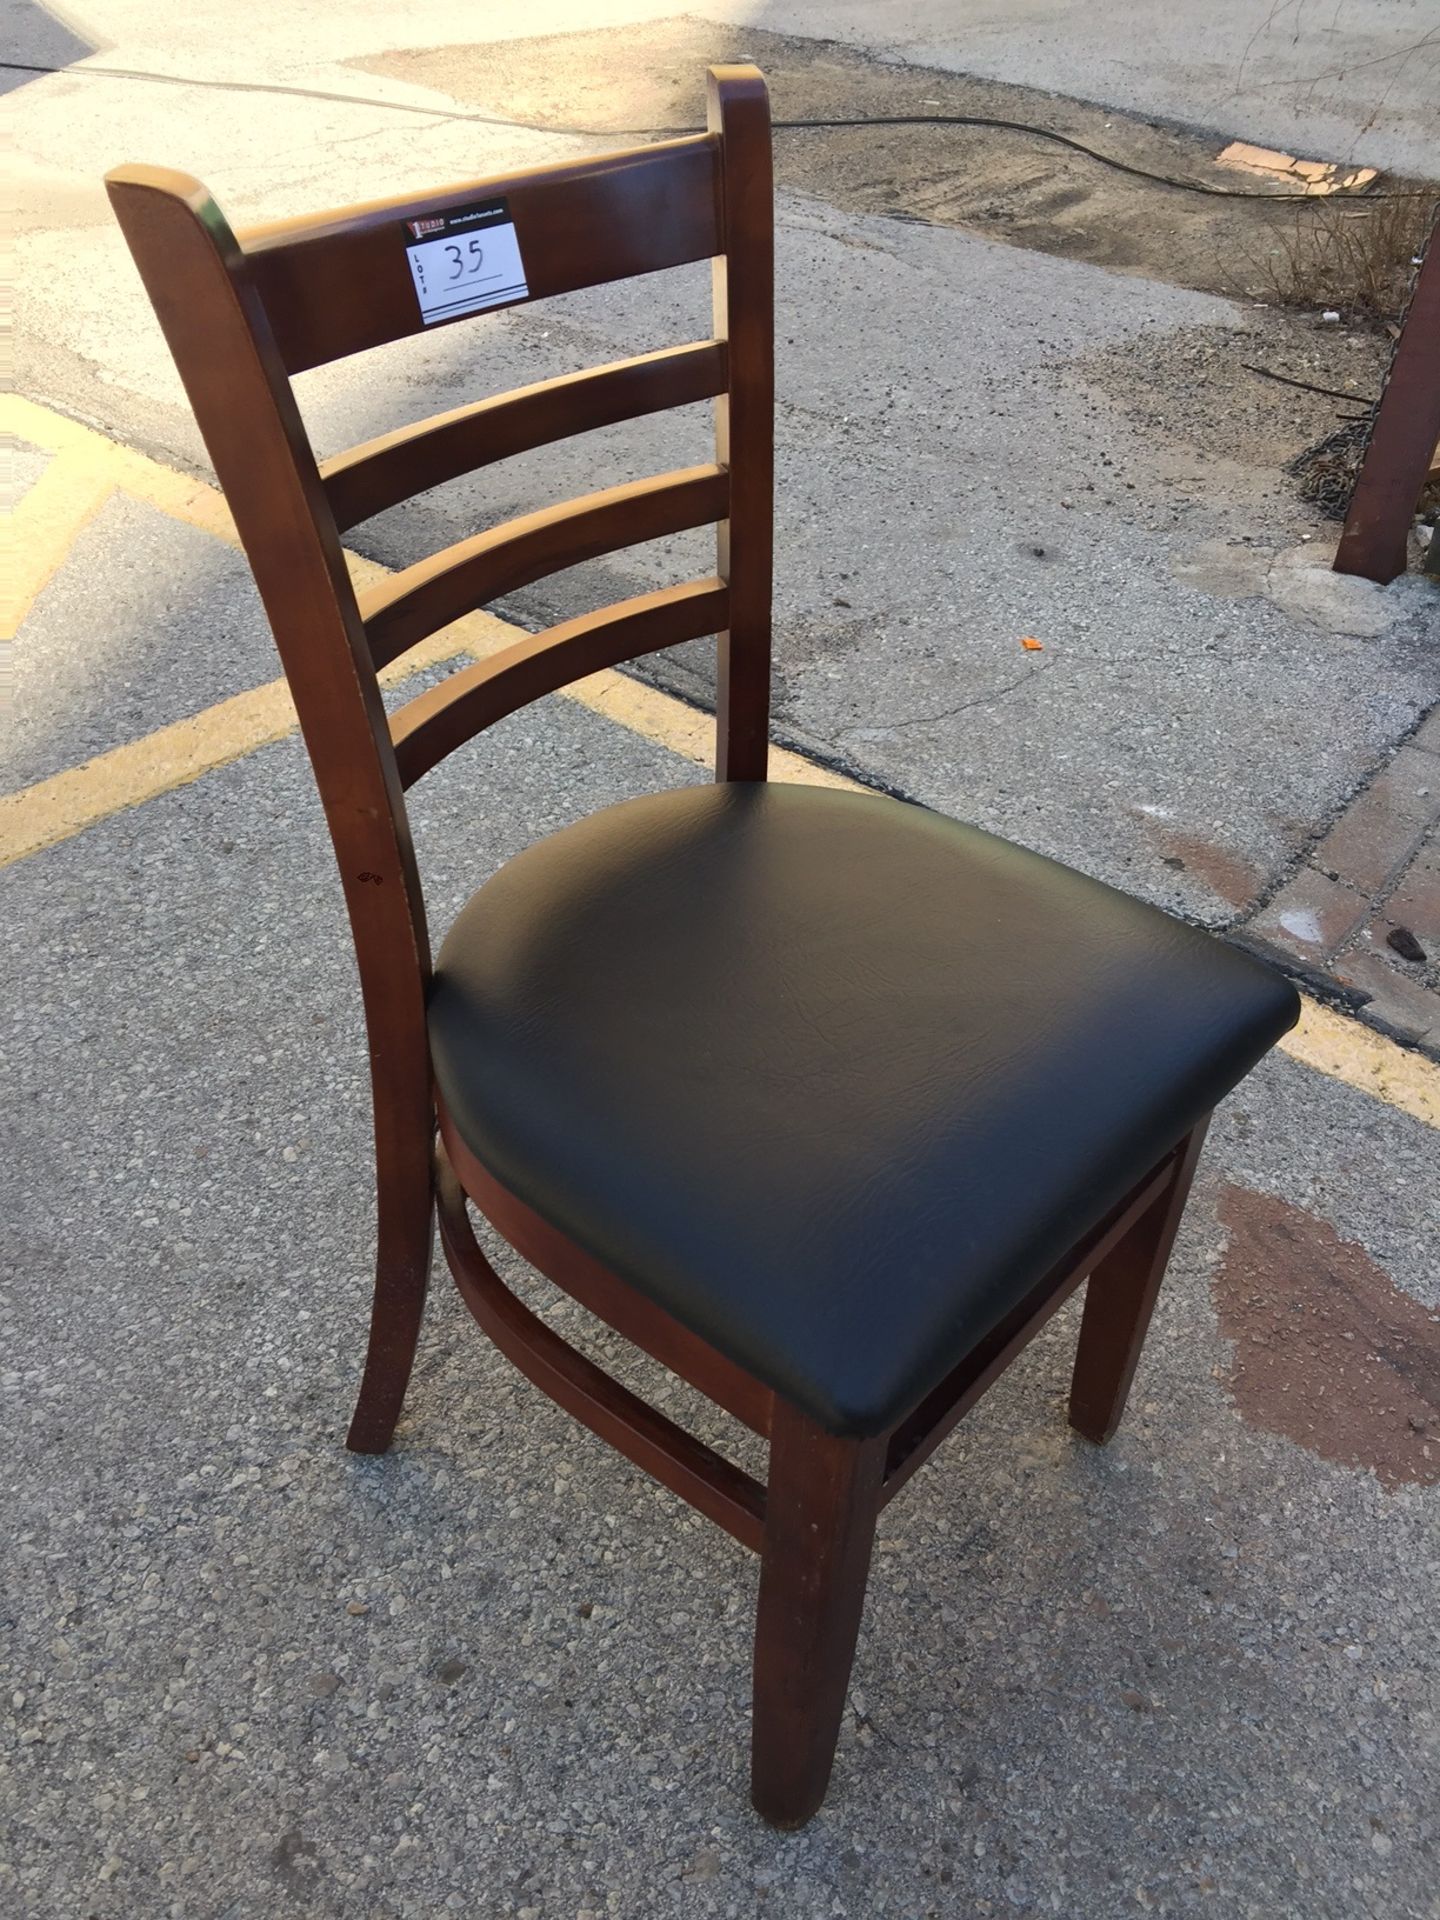 BLACK SOLID WOOD CHAIRS - Image 3 of 4